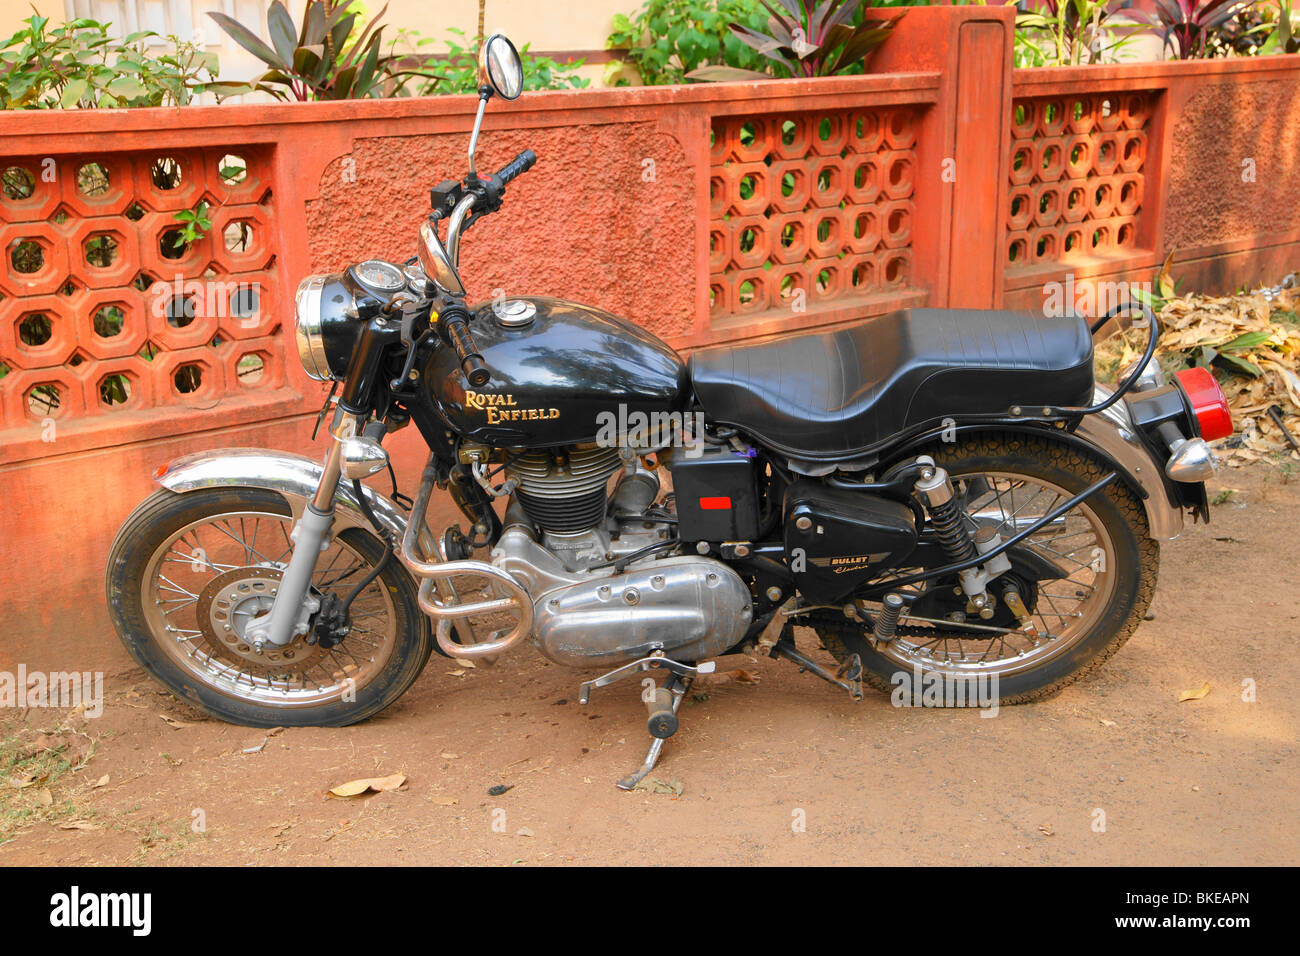 Bullet Bike High Resolution Stock Photography and Images - Alamy